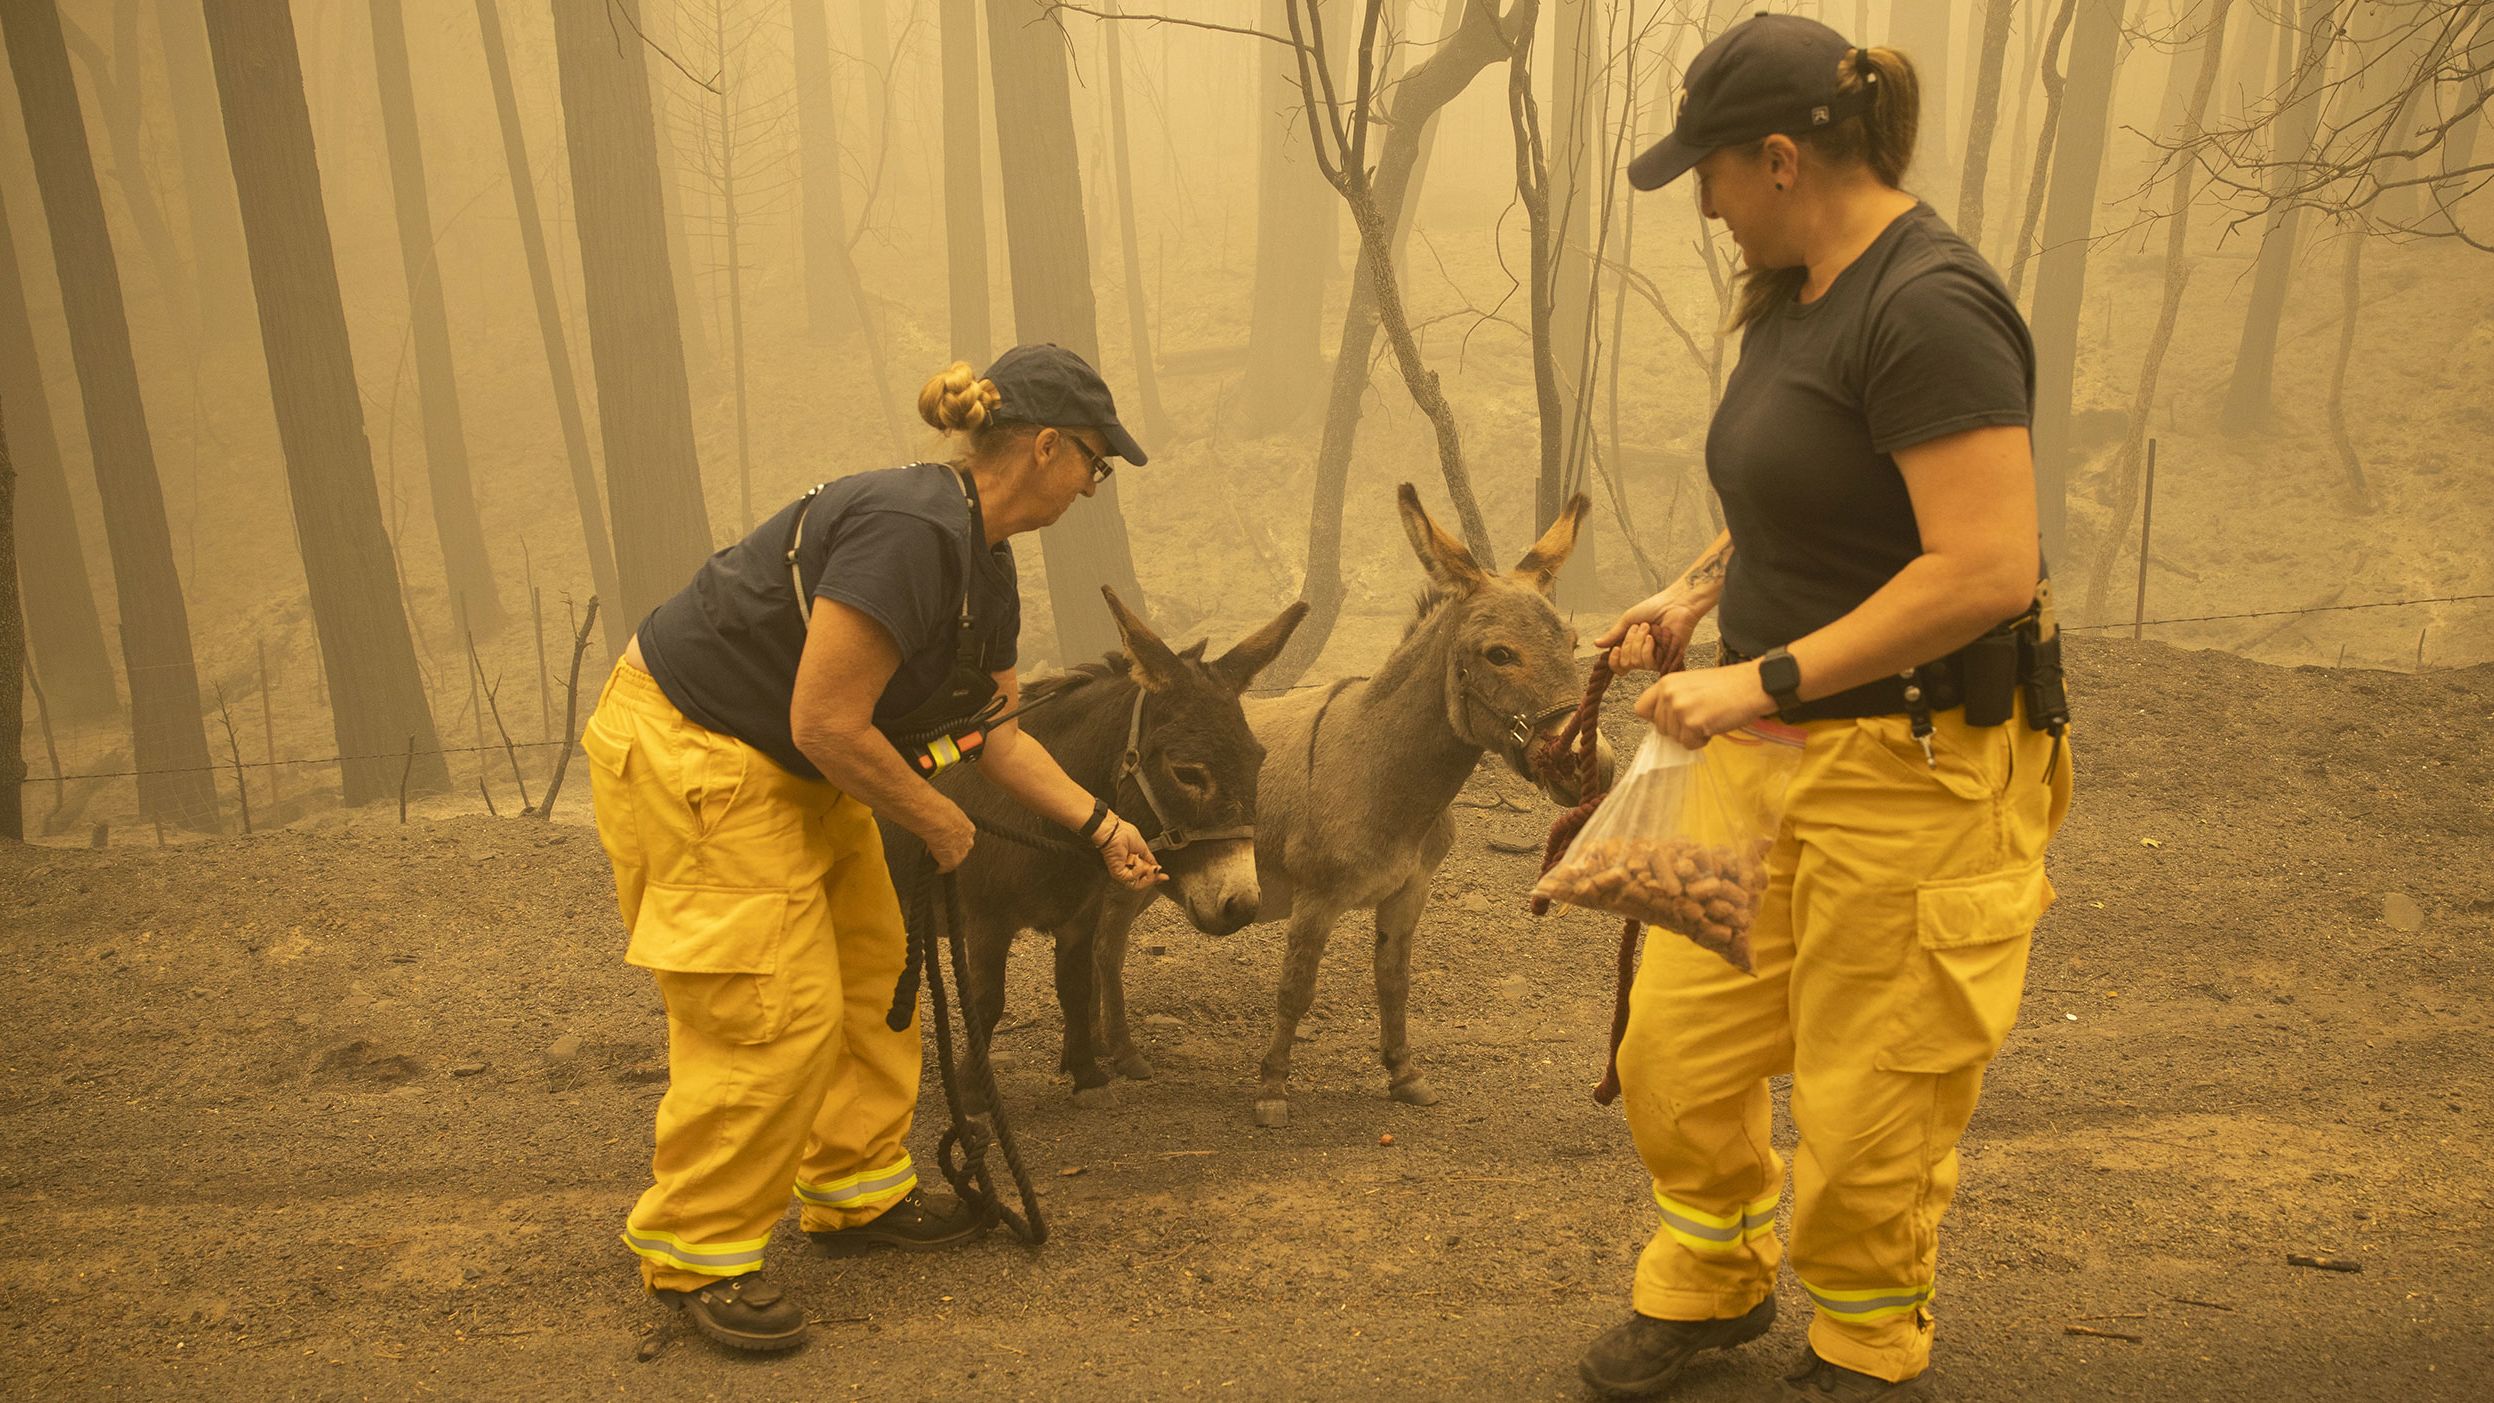 North Valley Disaster Group member Kari Zeitler and Butte County Animal Control officer Linda Newman bridle up two donkeys wandering along a roadside in Berry Creek, California, on September 11, 2020. The donkeys were displaced by the Bear Fire.